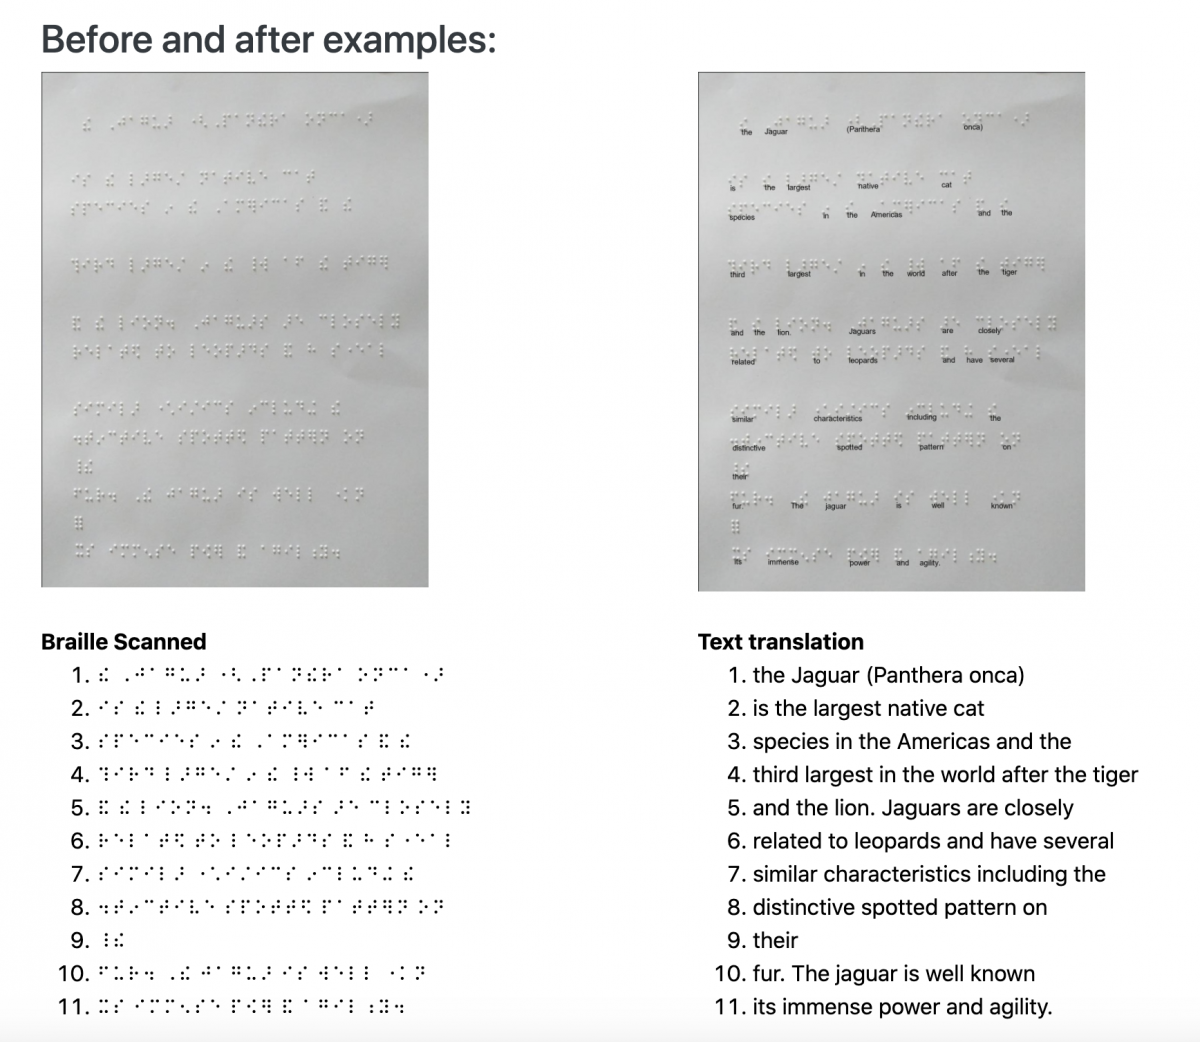 Example of image of braille translated into text